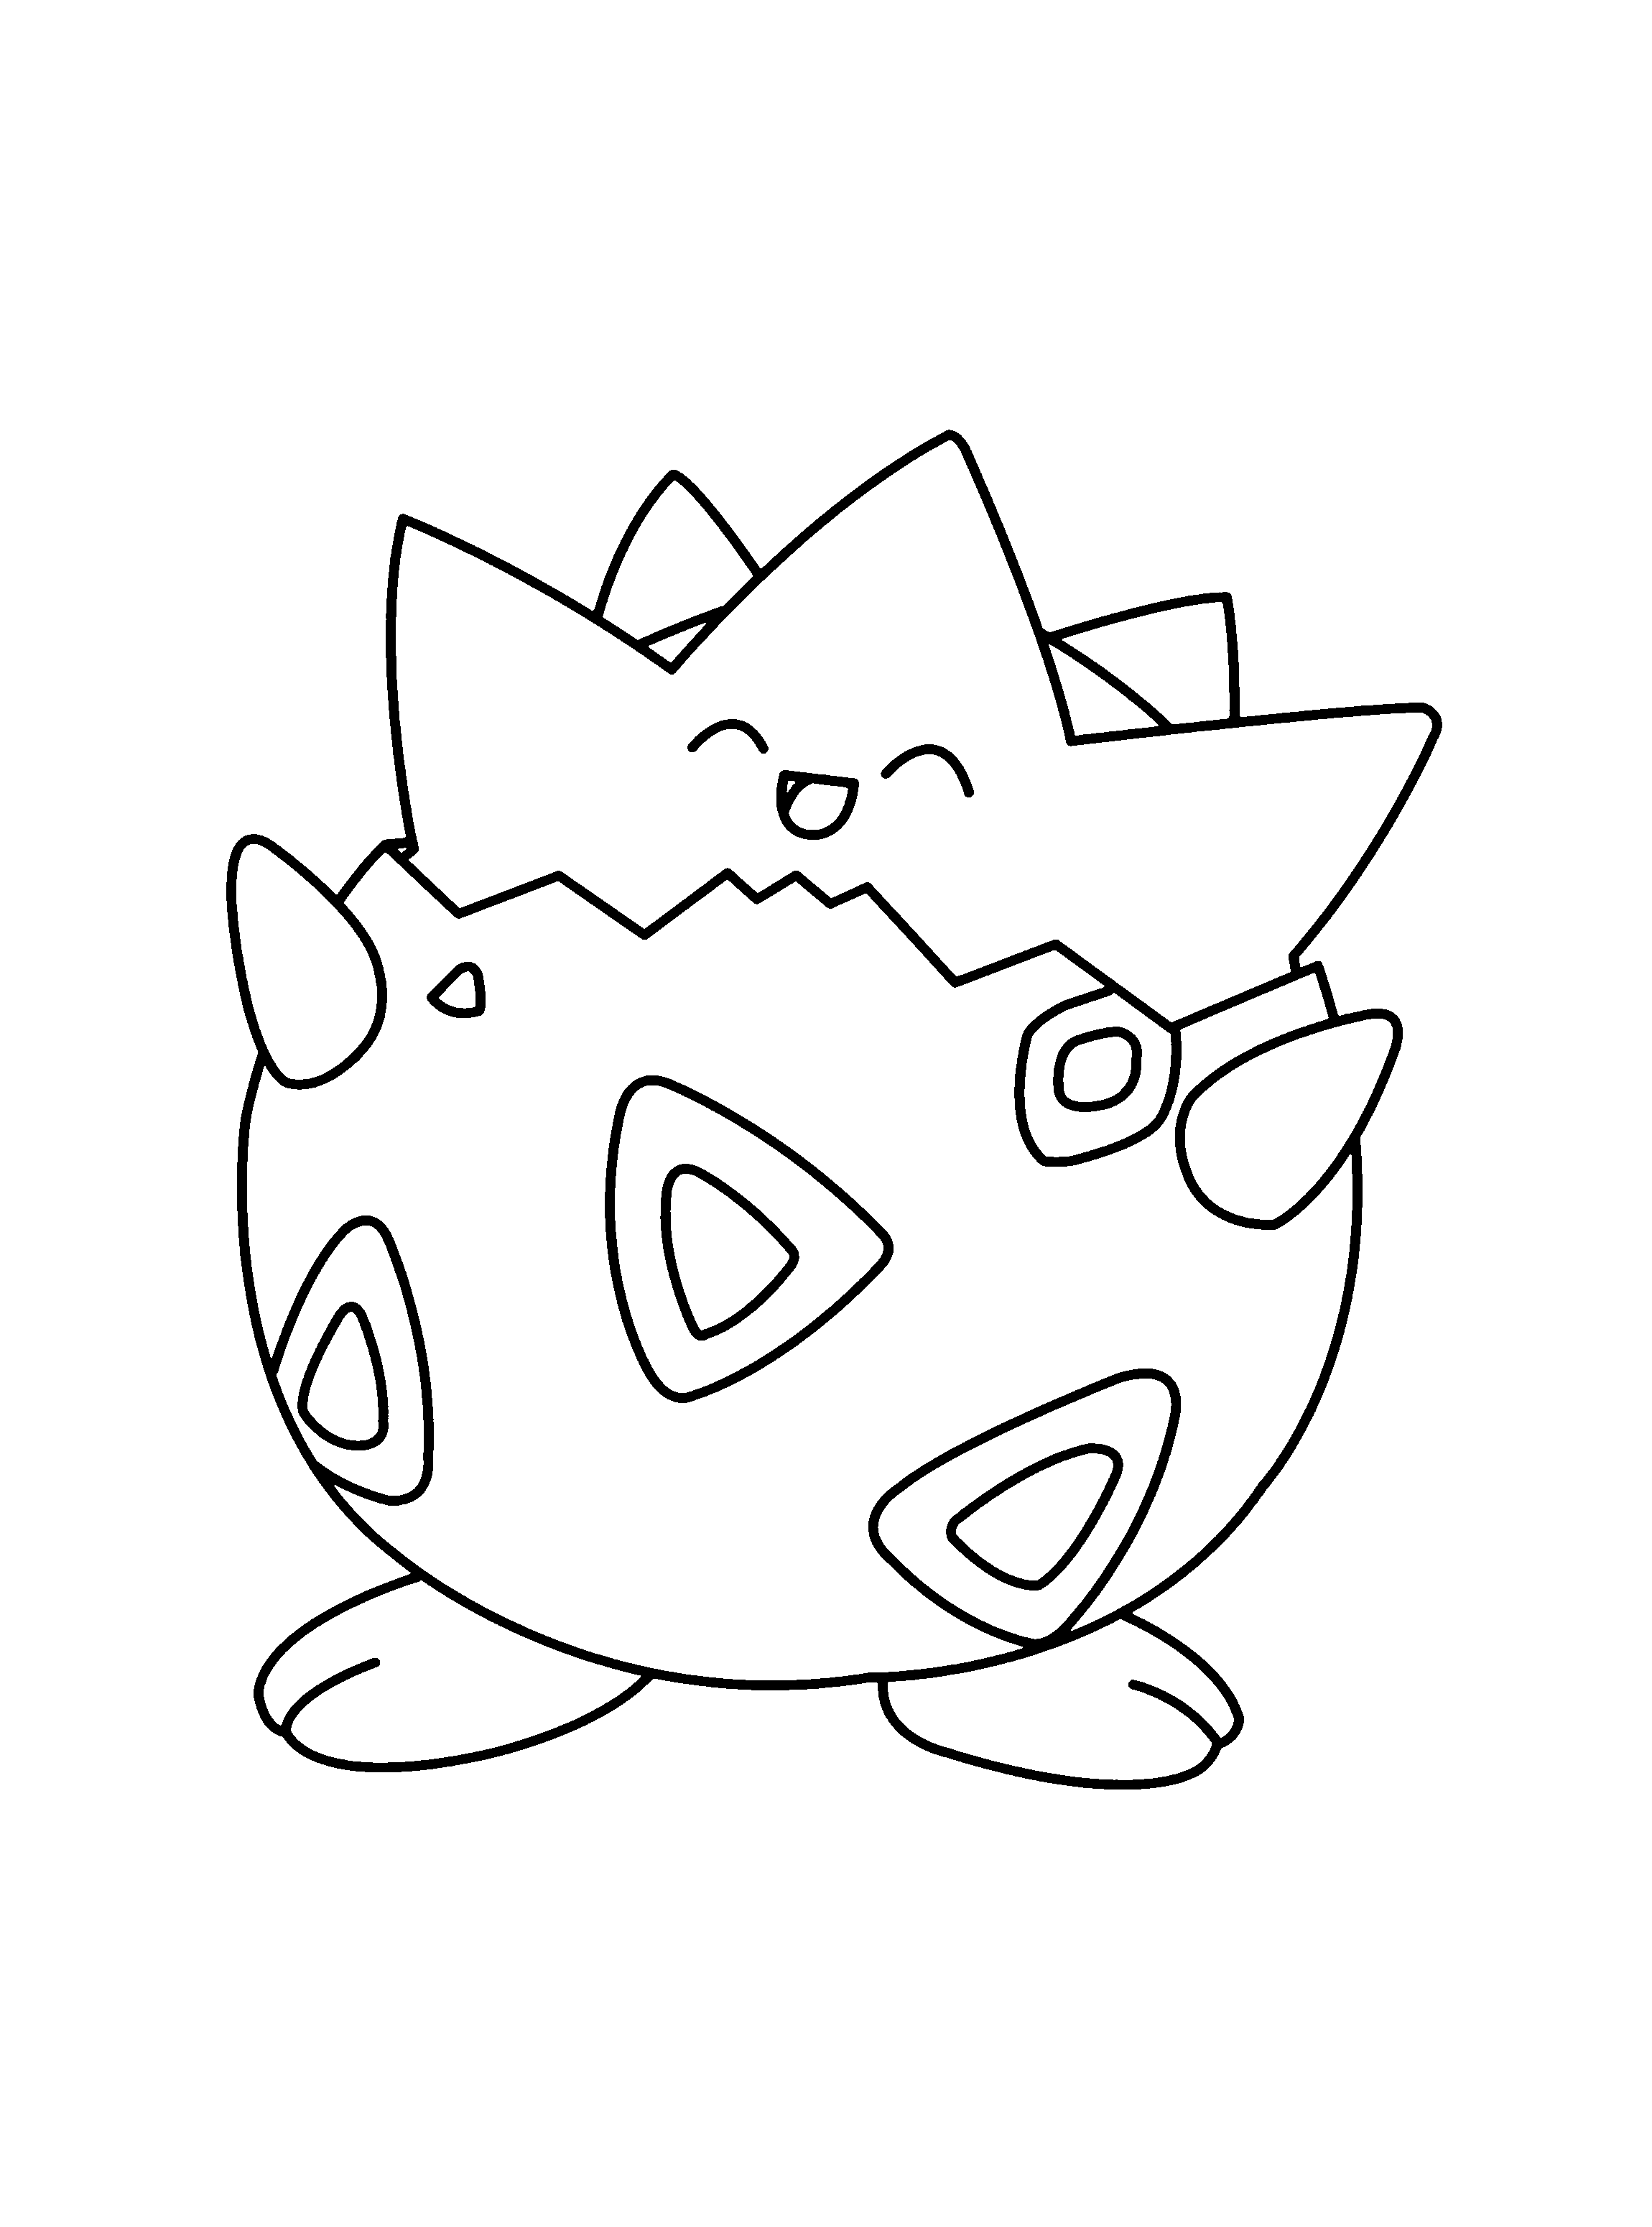 Togepi 8 Cool Coloring Page